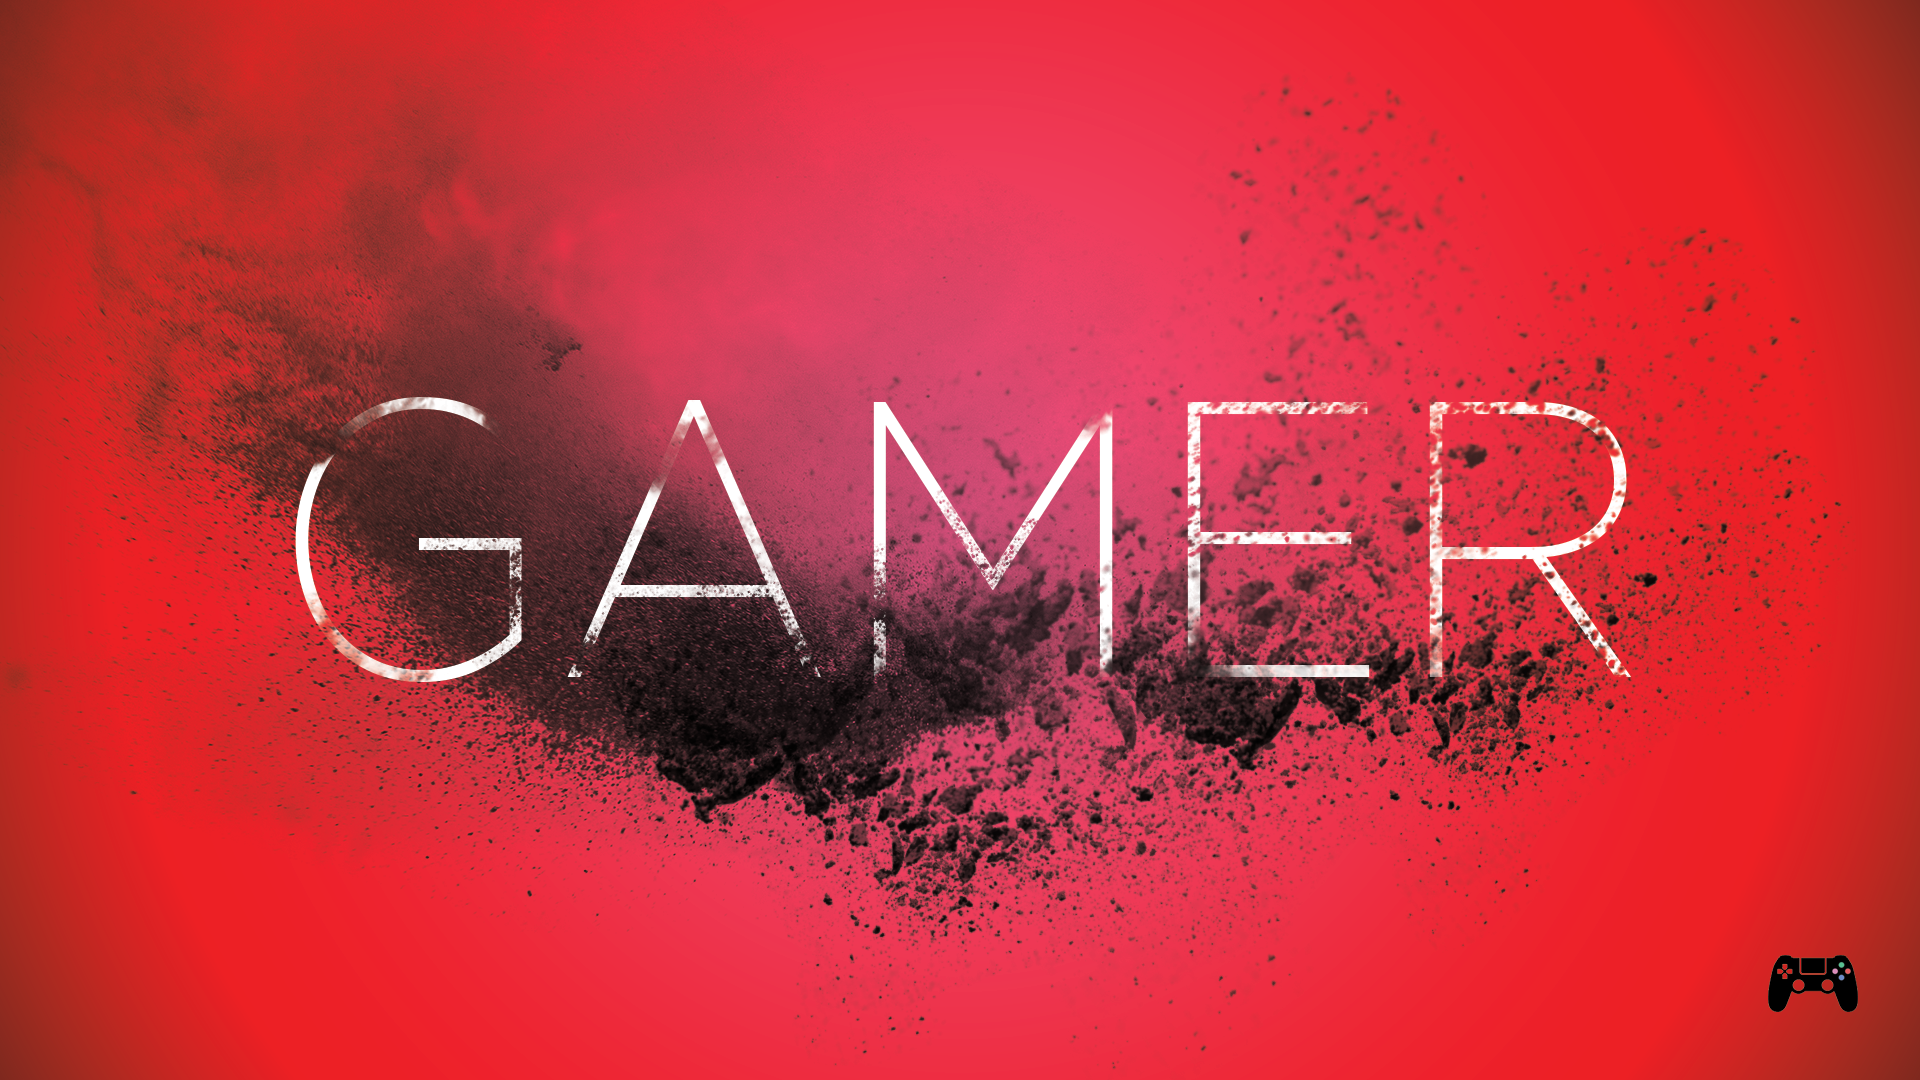 General 1920x1080 4Gamers gamer text abstract digital art typography red background red